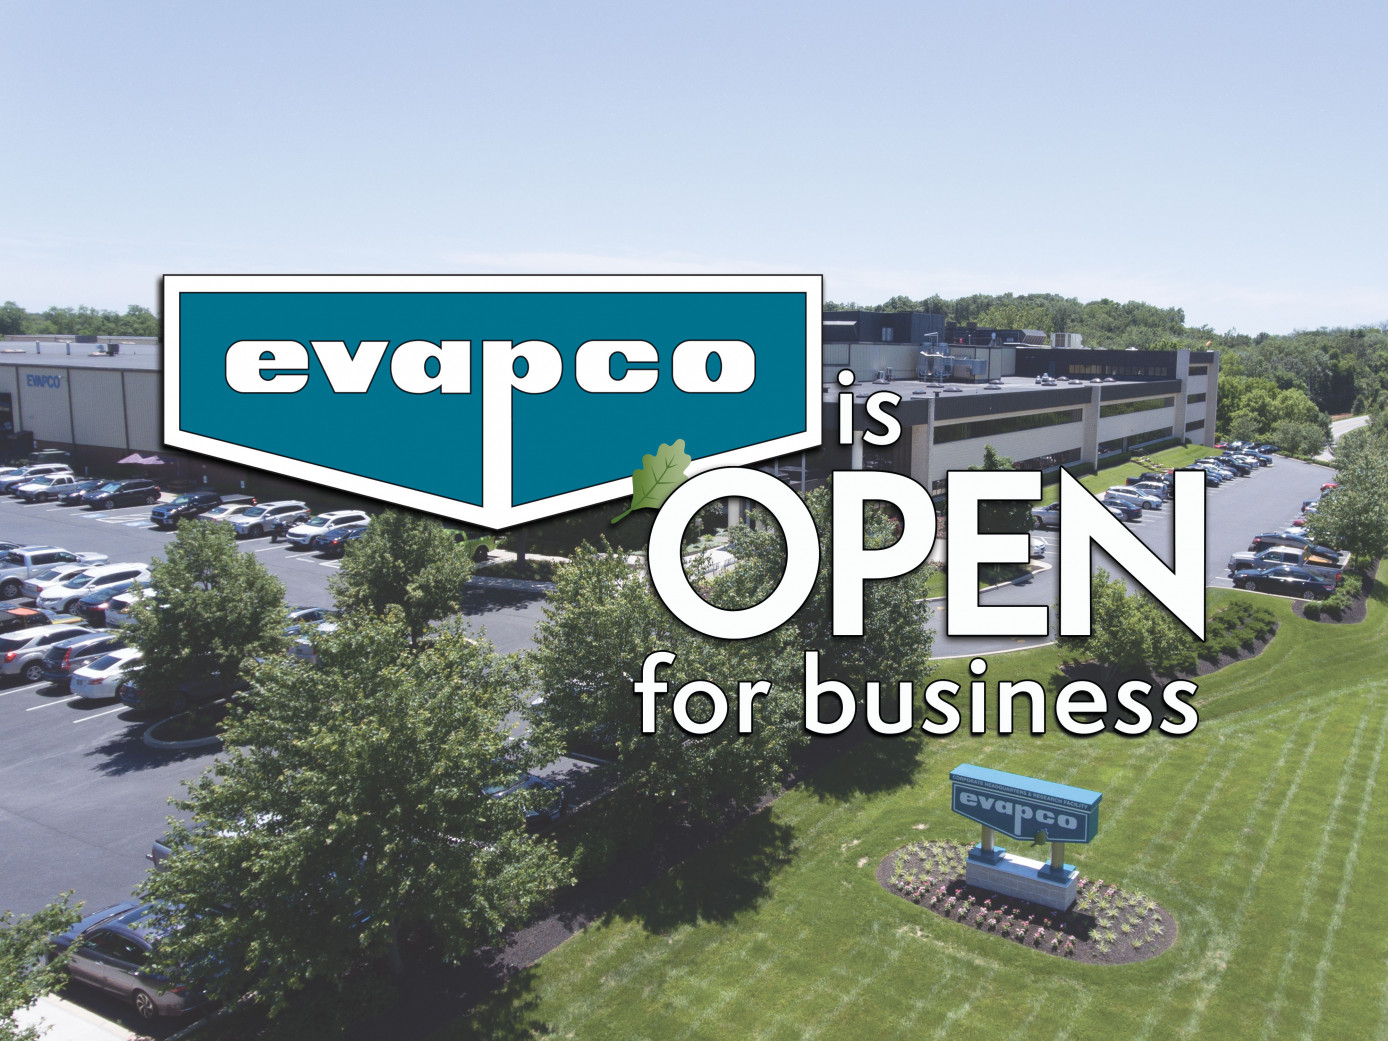 EVAPCO Overview with Overlaid Text